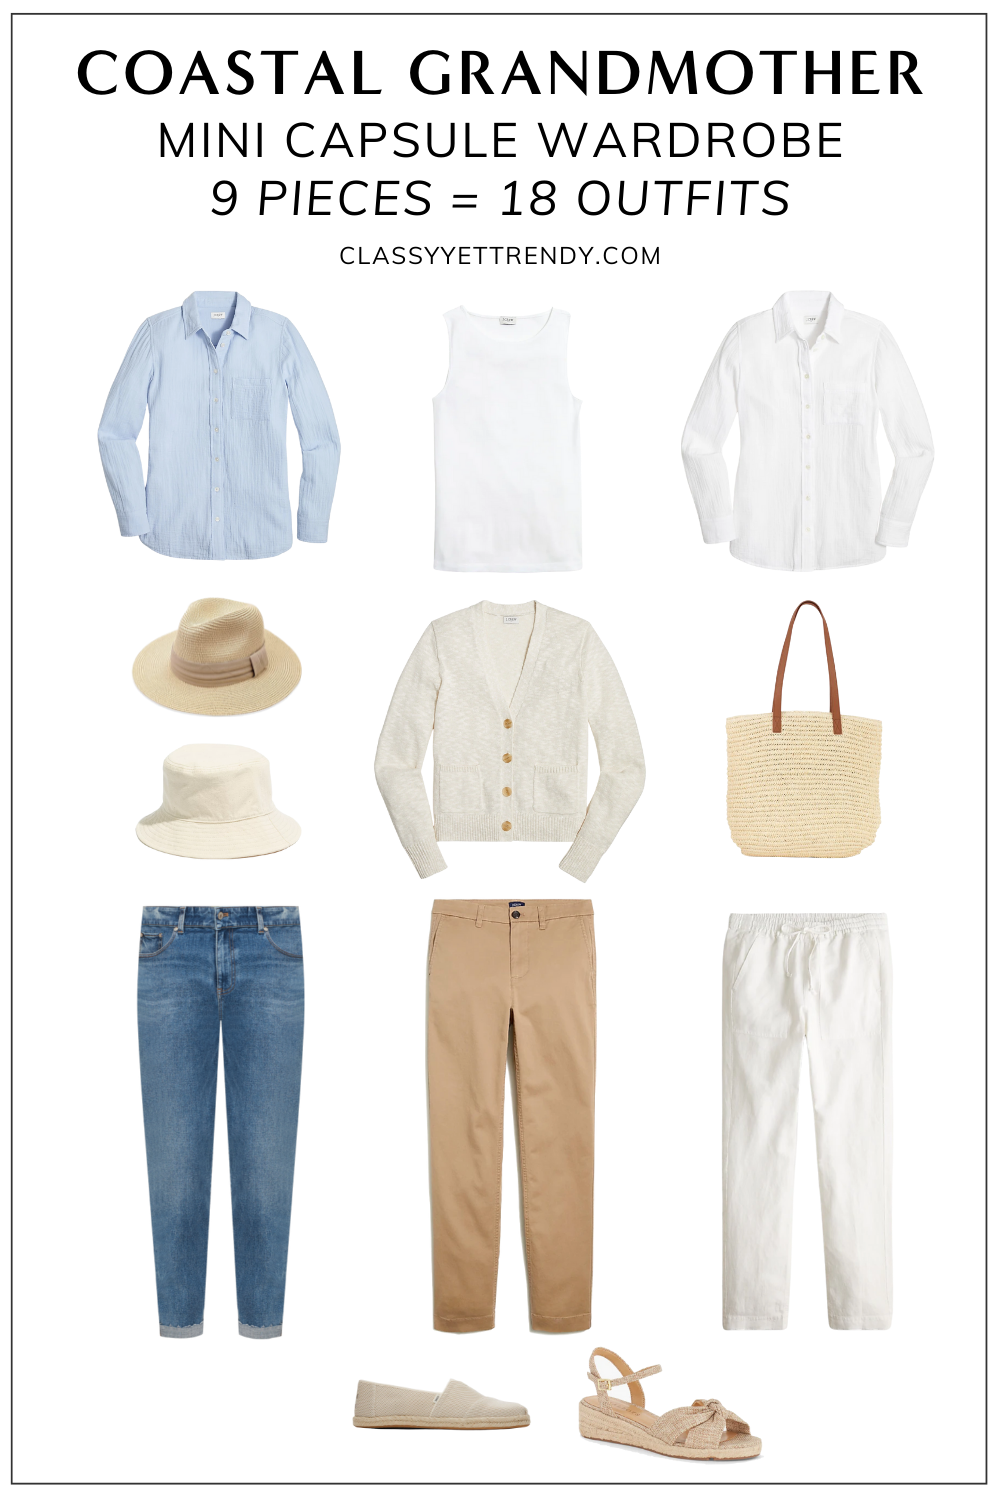 8 Nautical Outfits For Women - THE FASHION HOUSE MOM